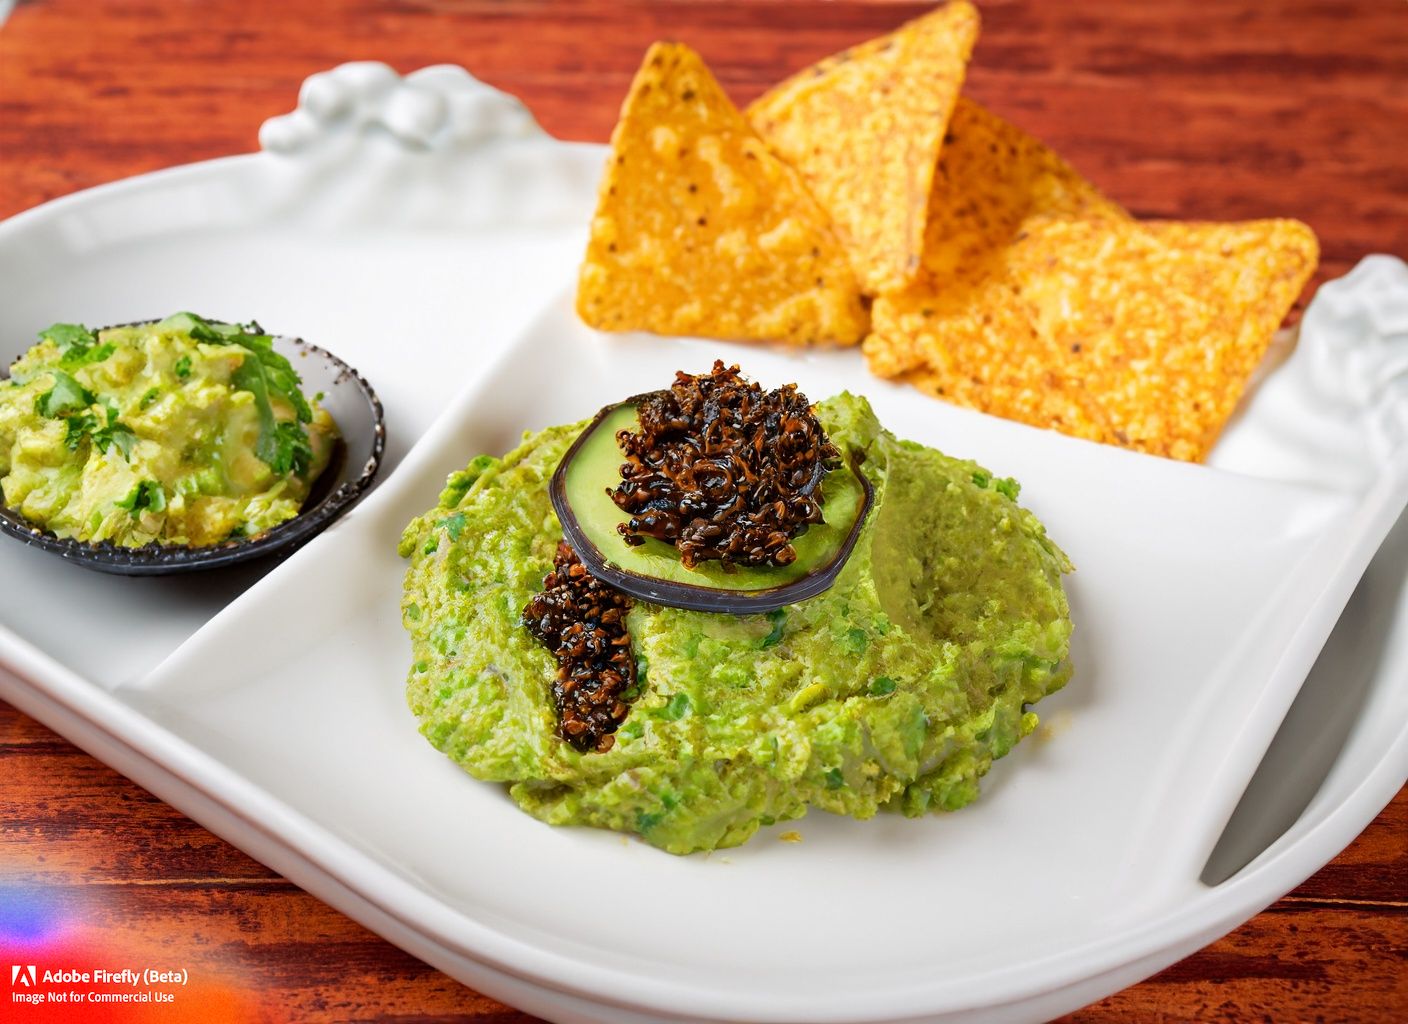 A dish of escamoles, or Mexican ant caviar, served with a side of guacamole and tortilla chips.